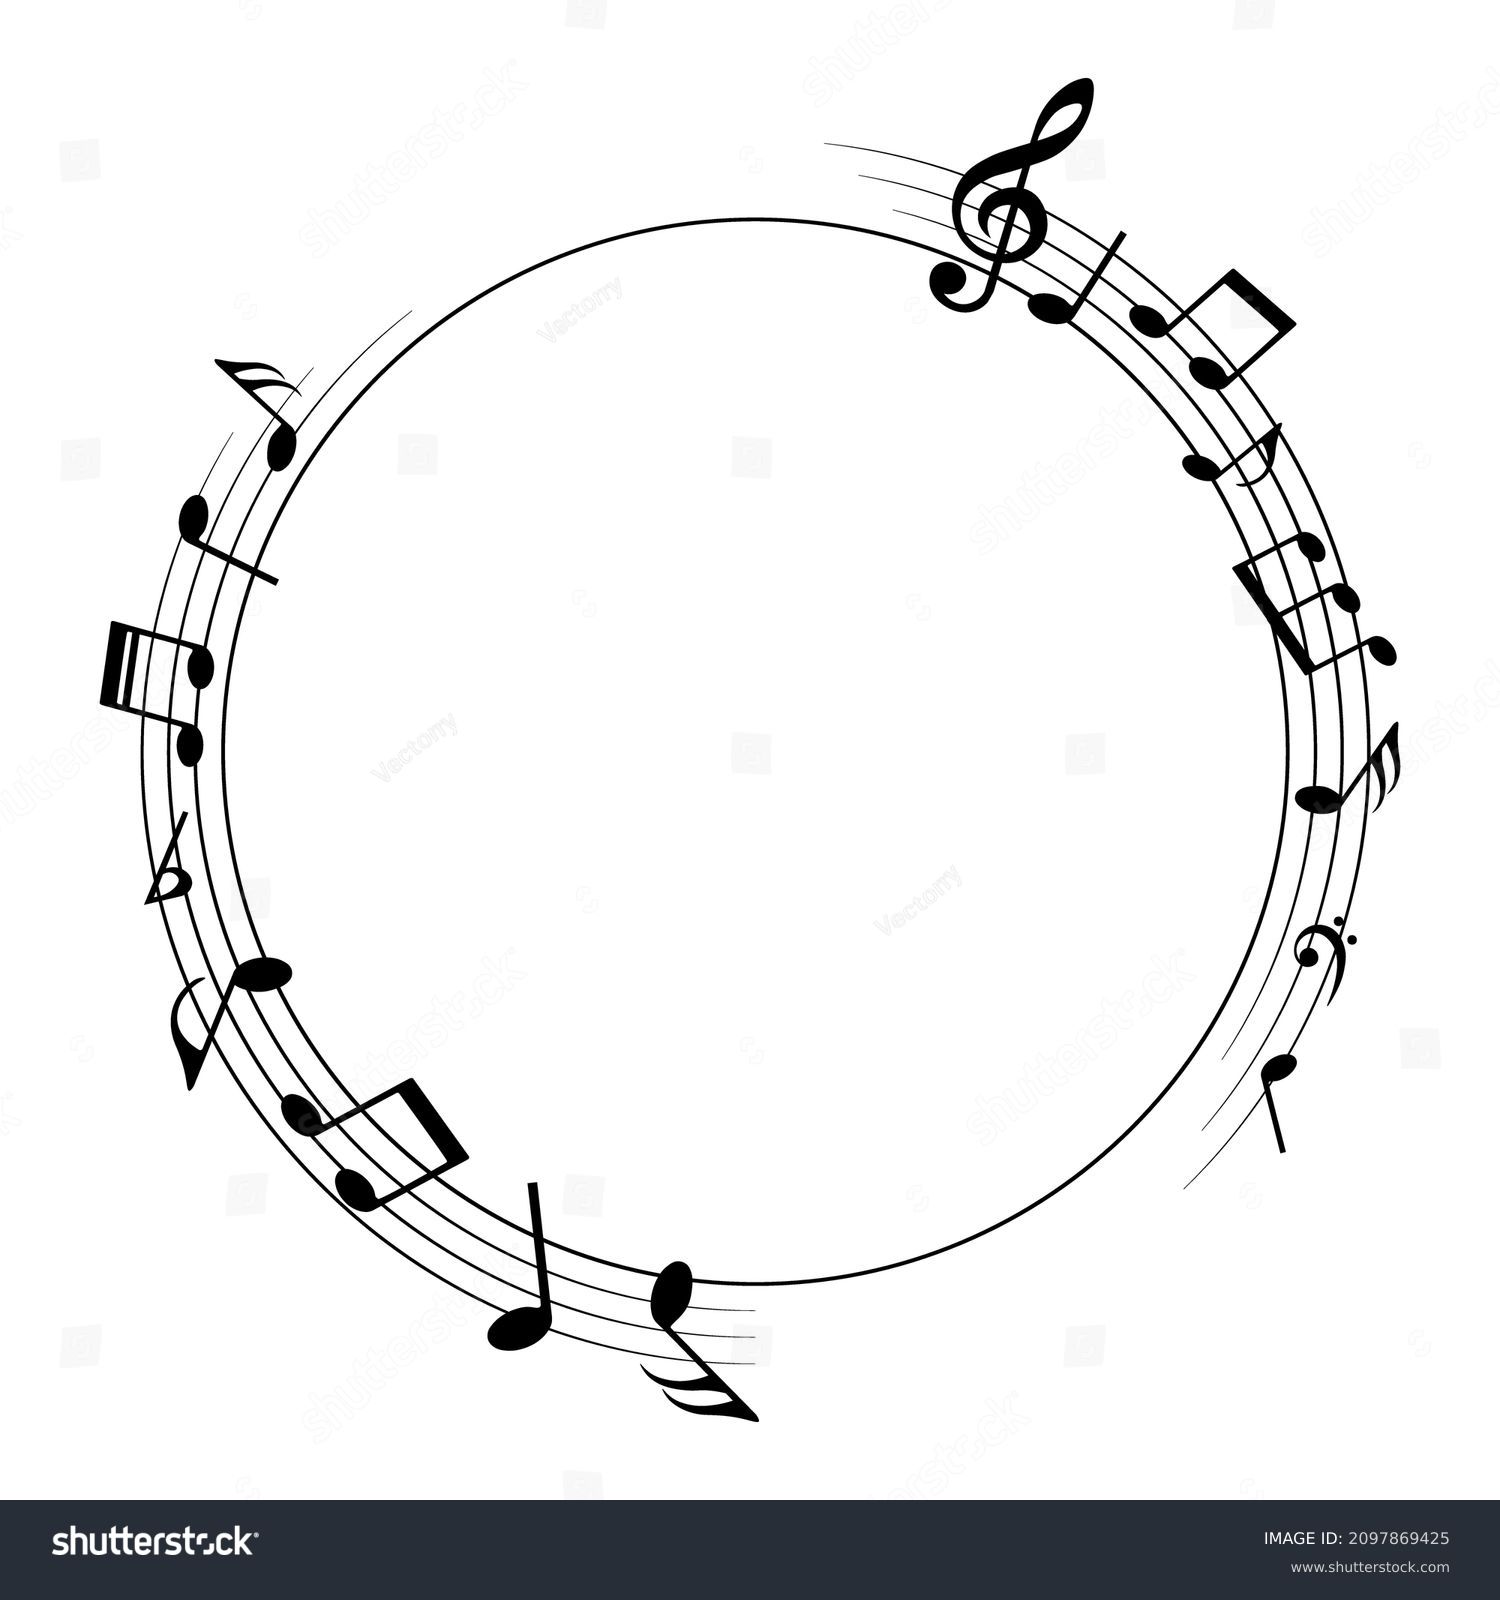 Music notes background, round musical frame, vector illustration. #2097869425